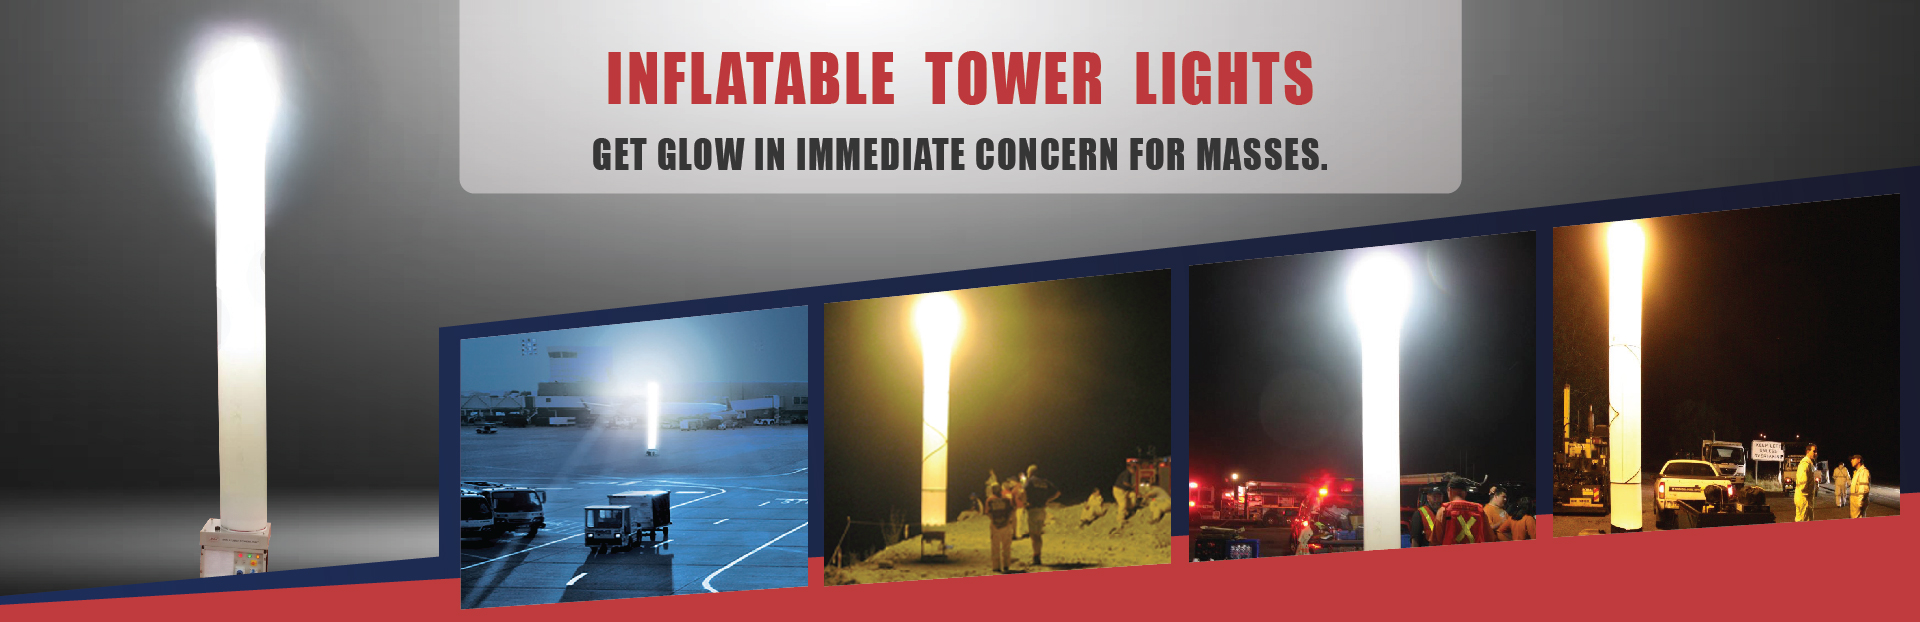 Inflatable Tower Light